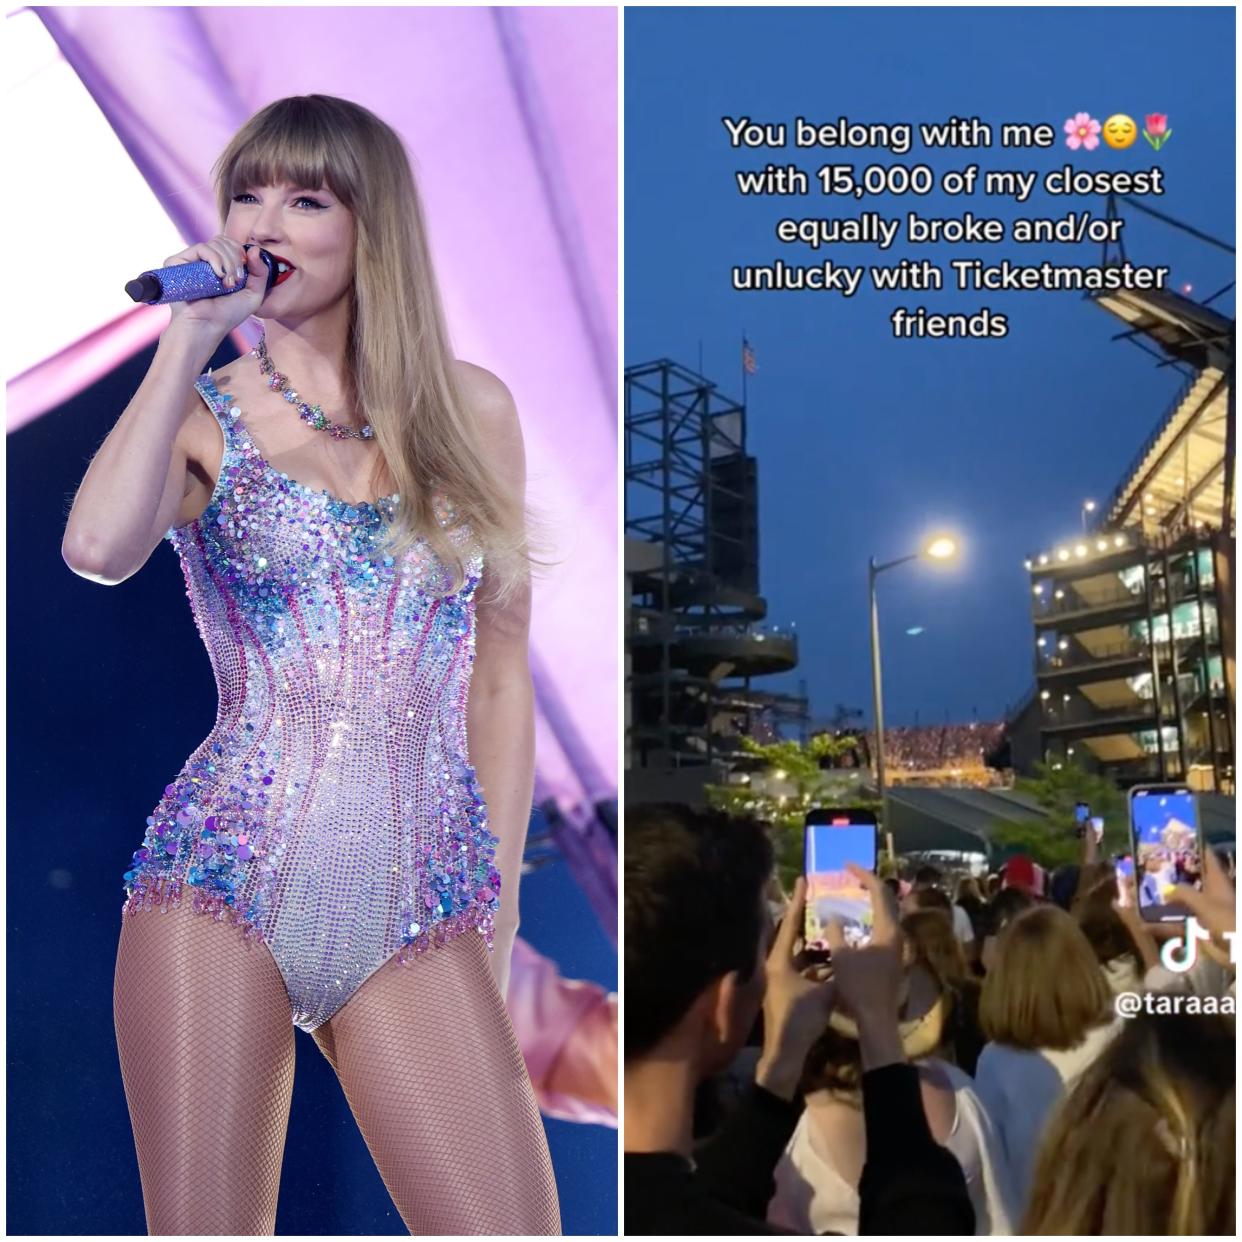 Taylor Swift performs onstage during "Taylor Swift | The Eras Tour" at Gillette Stadium on May 19, 2023 in Foxborough, Massachusetts./Fans "Taylor-gate" to watch her perform outside venues